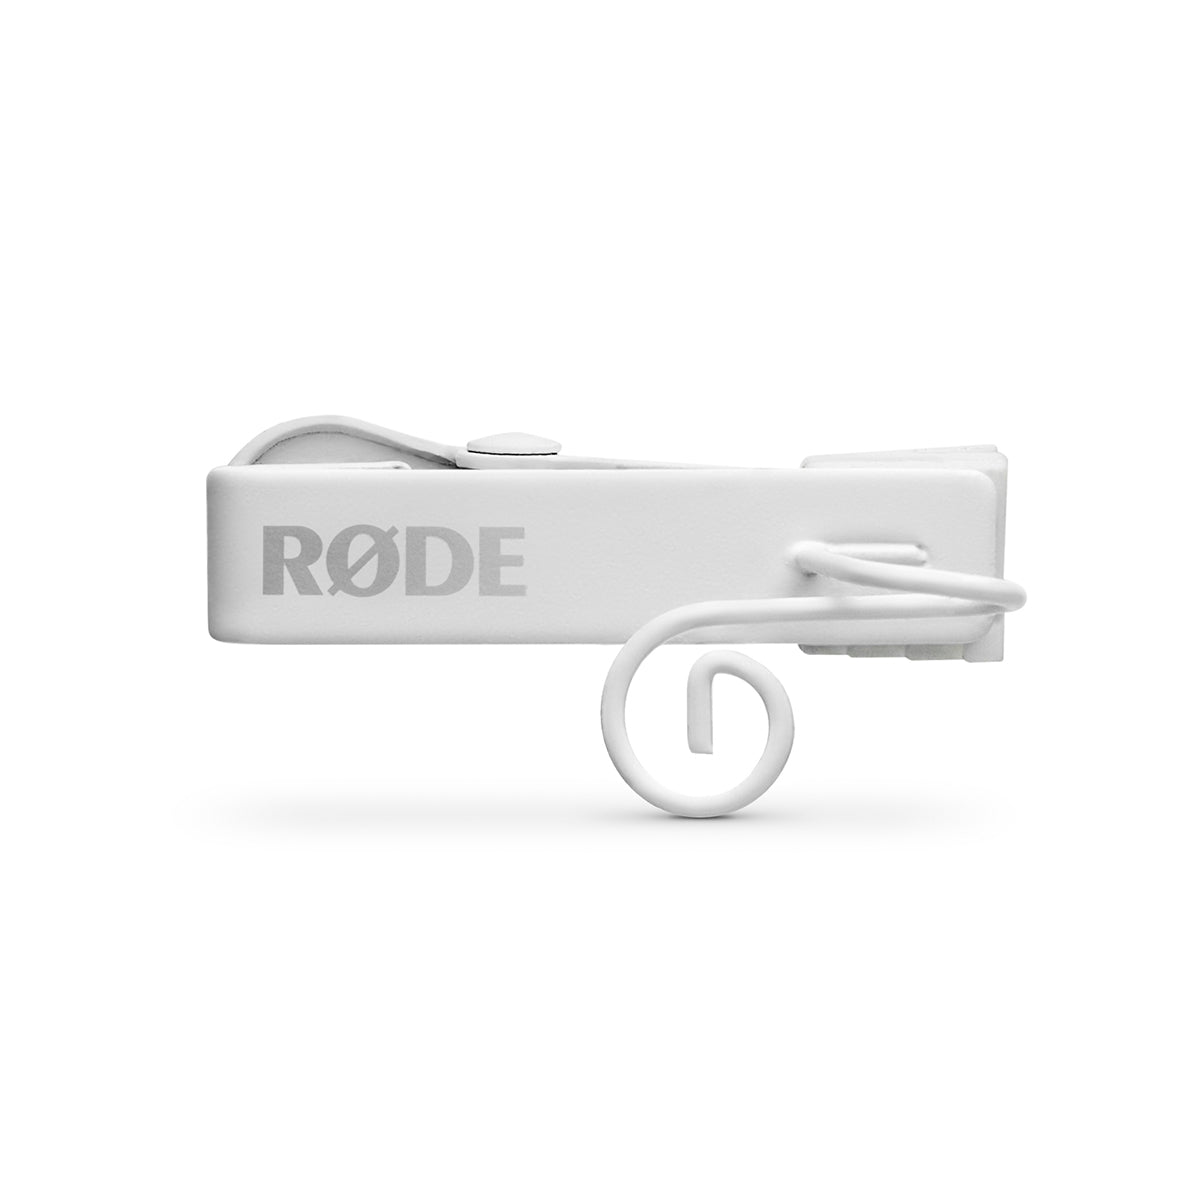 RODE Lavalier GO Omnidirectional Lavalier Microphone (White)